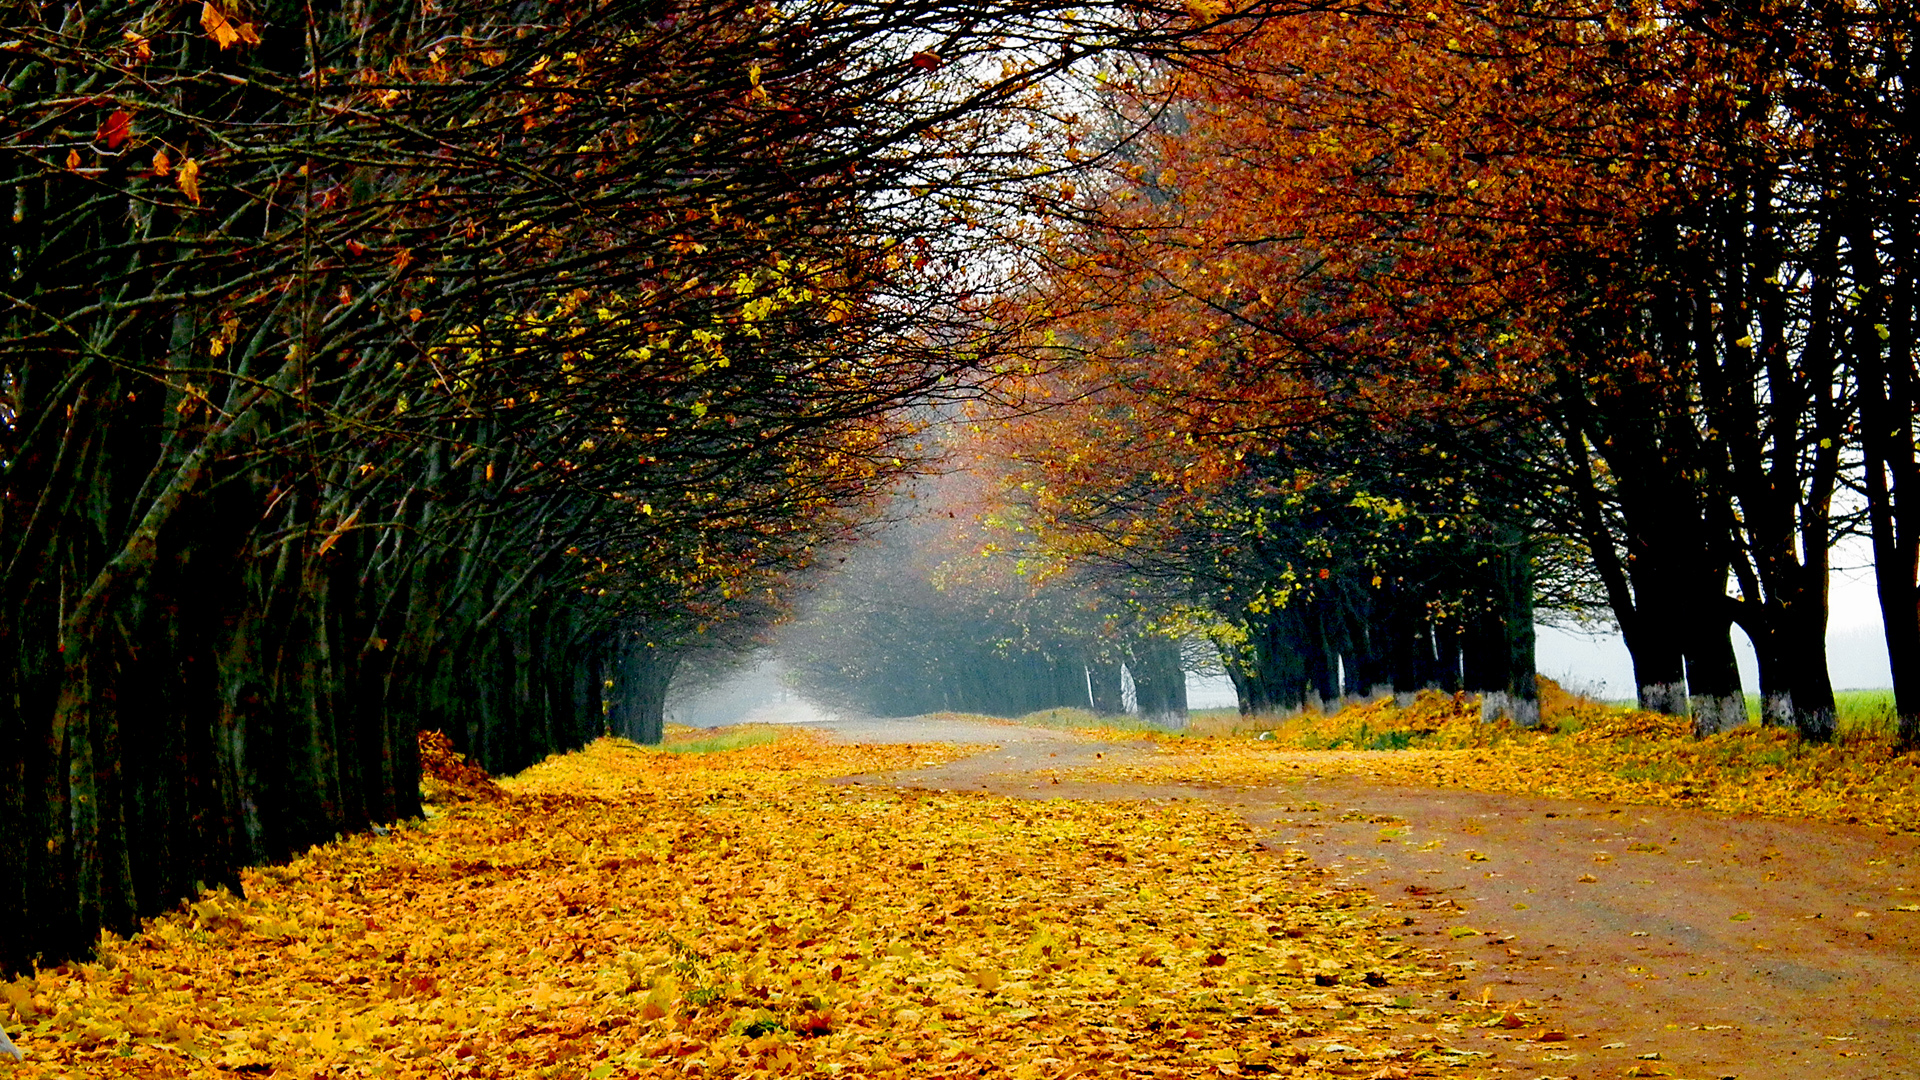 Autumn Scenery Wallpapers, Pictures, Images